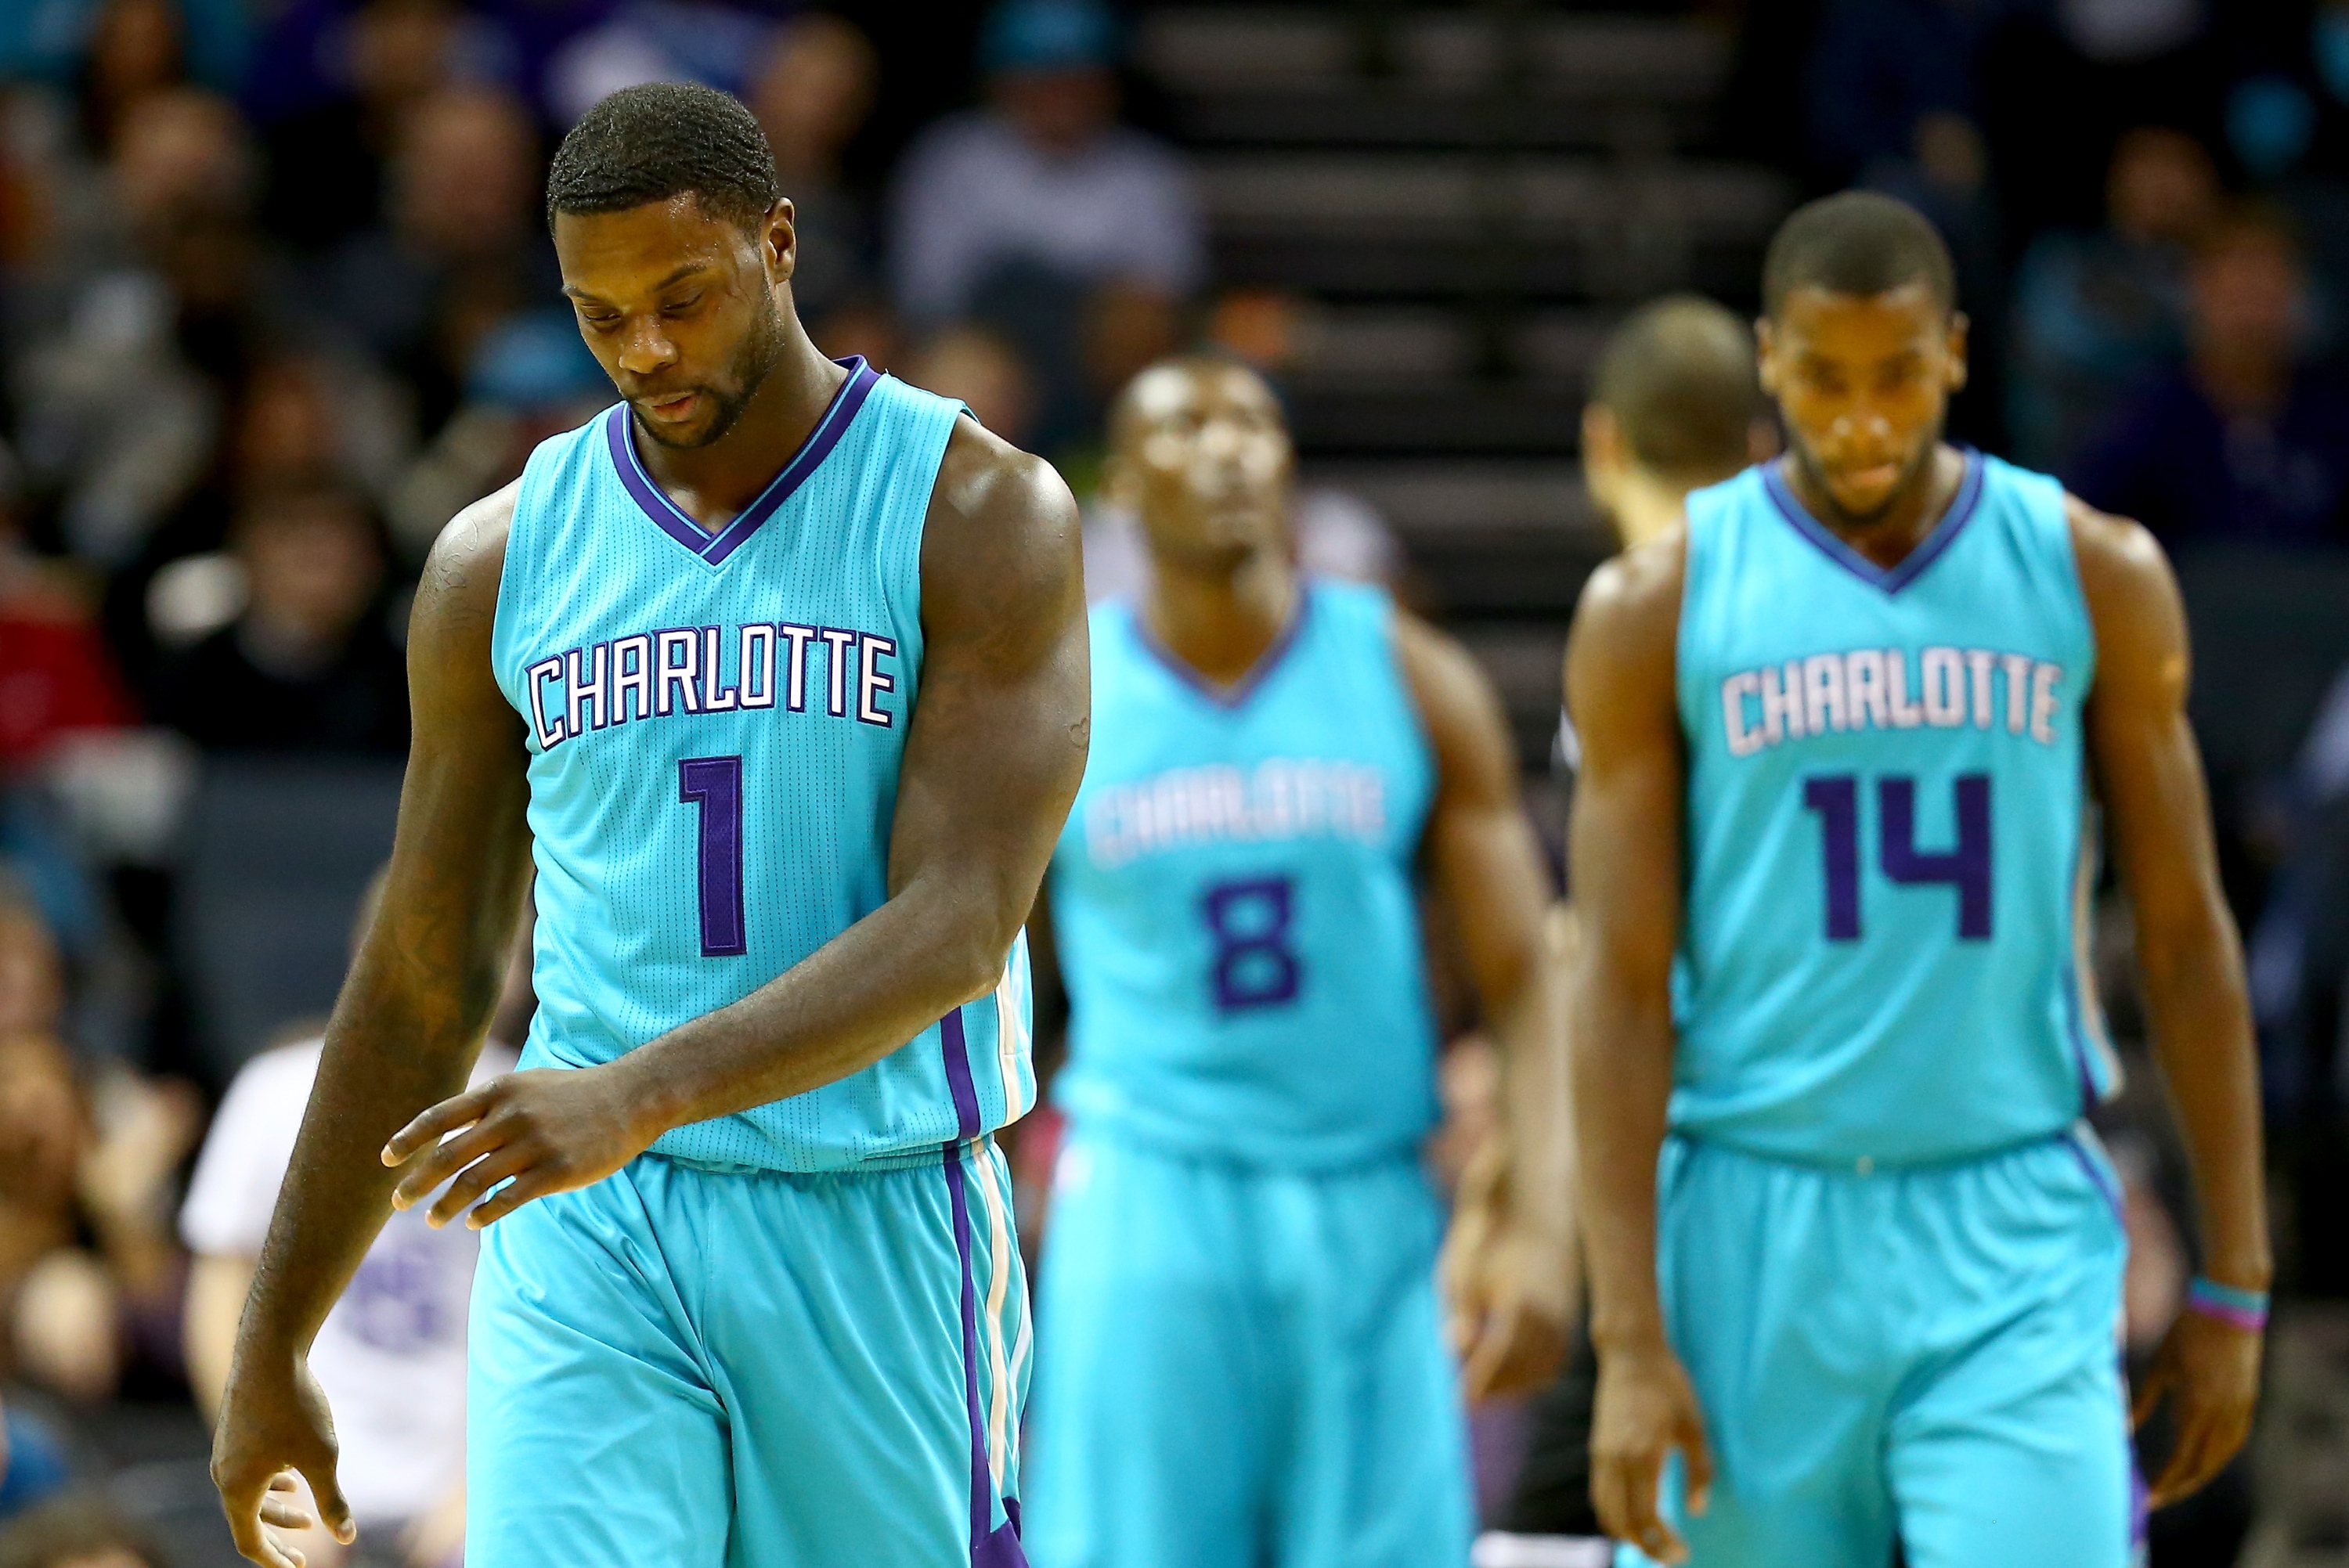 Lance Stephenson is coming off a season he and the Hornets would like to forget. (Streeter Lecka/Getty Images)